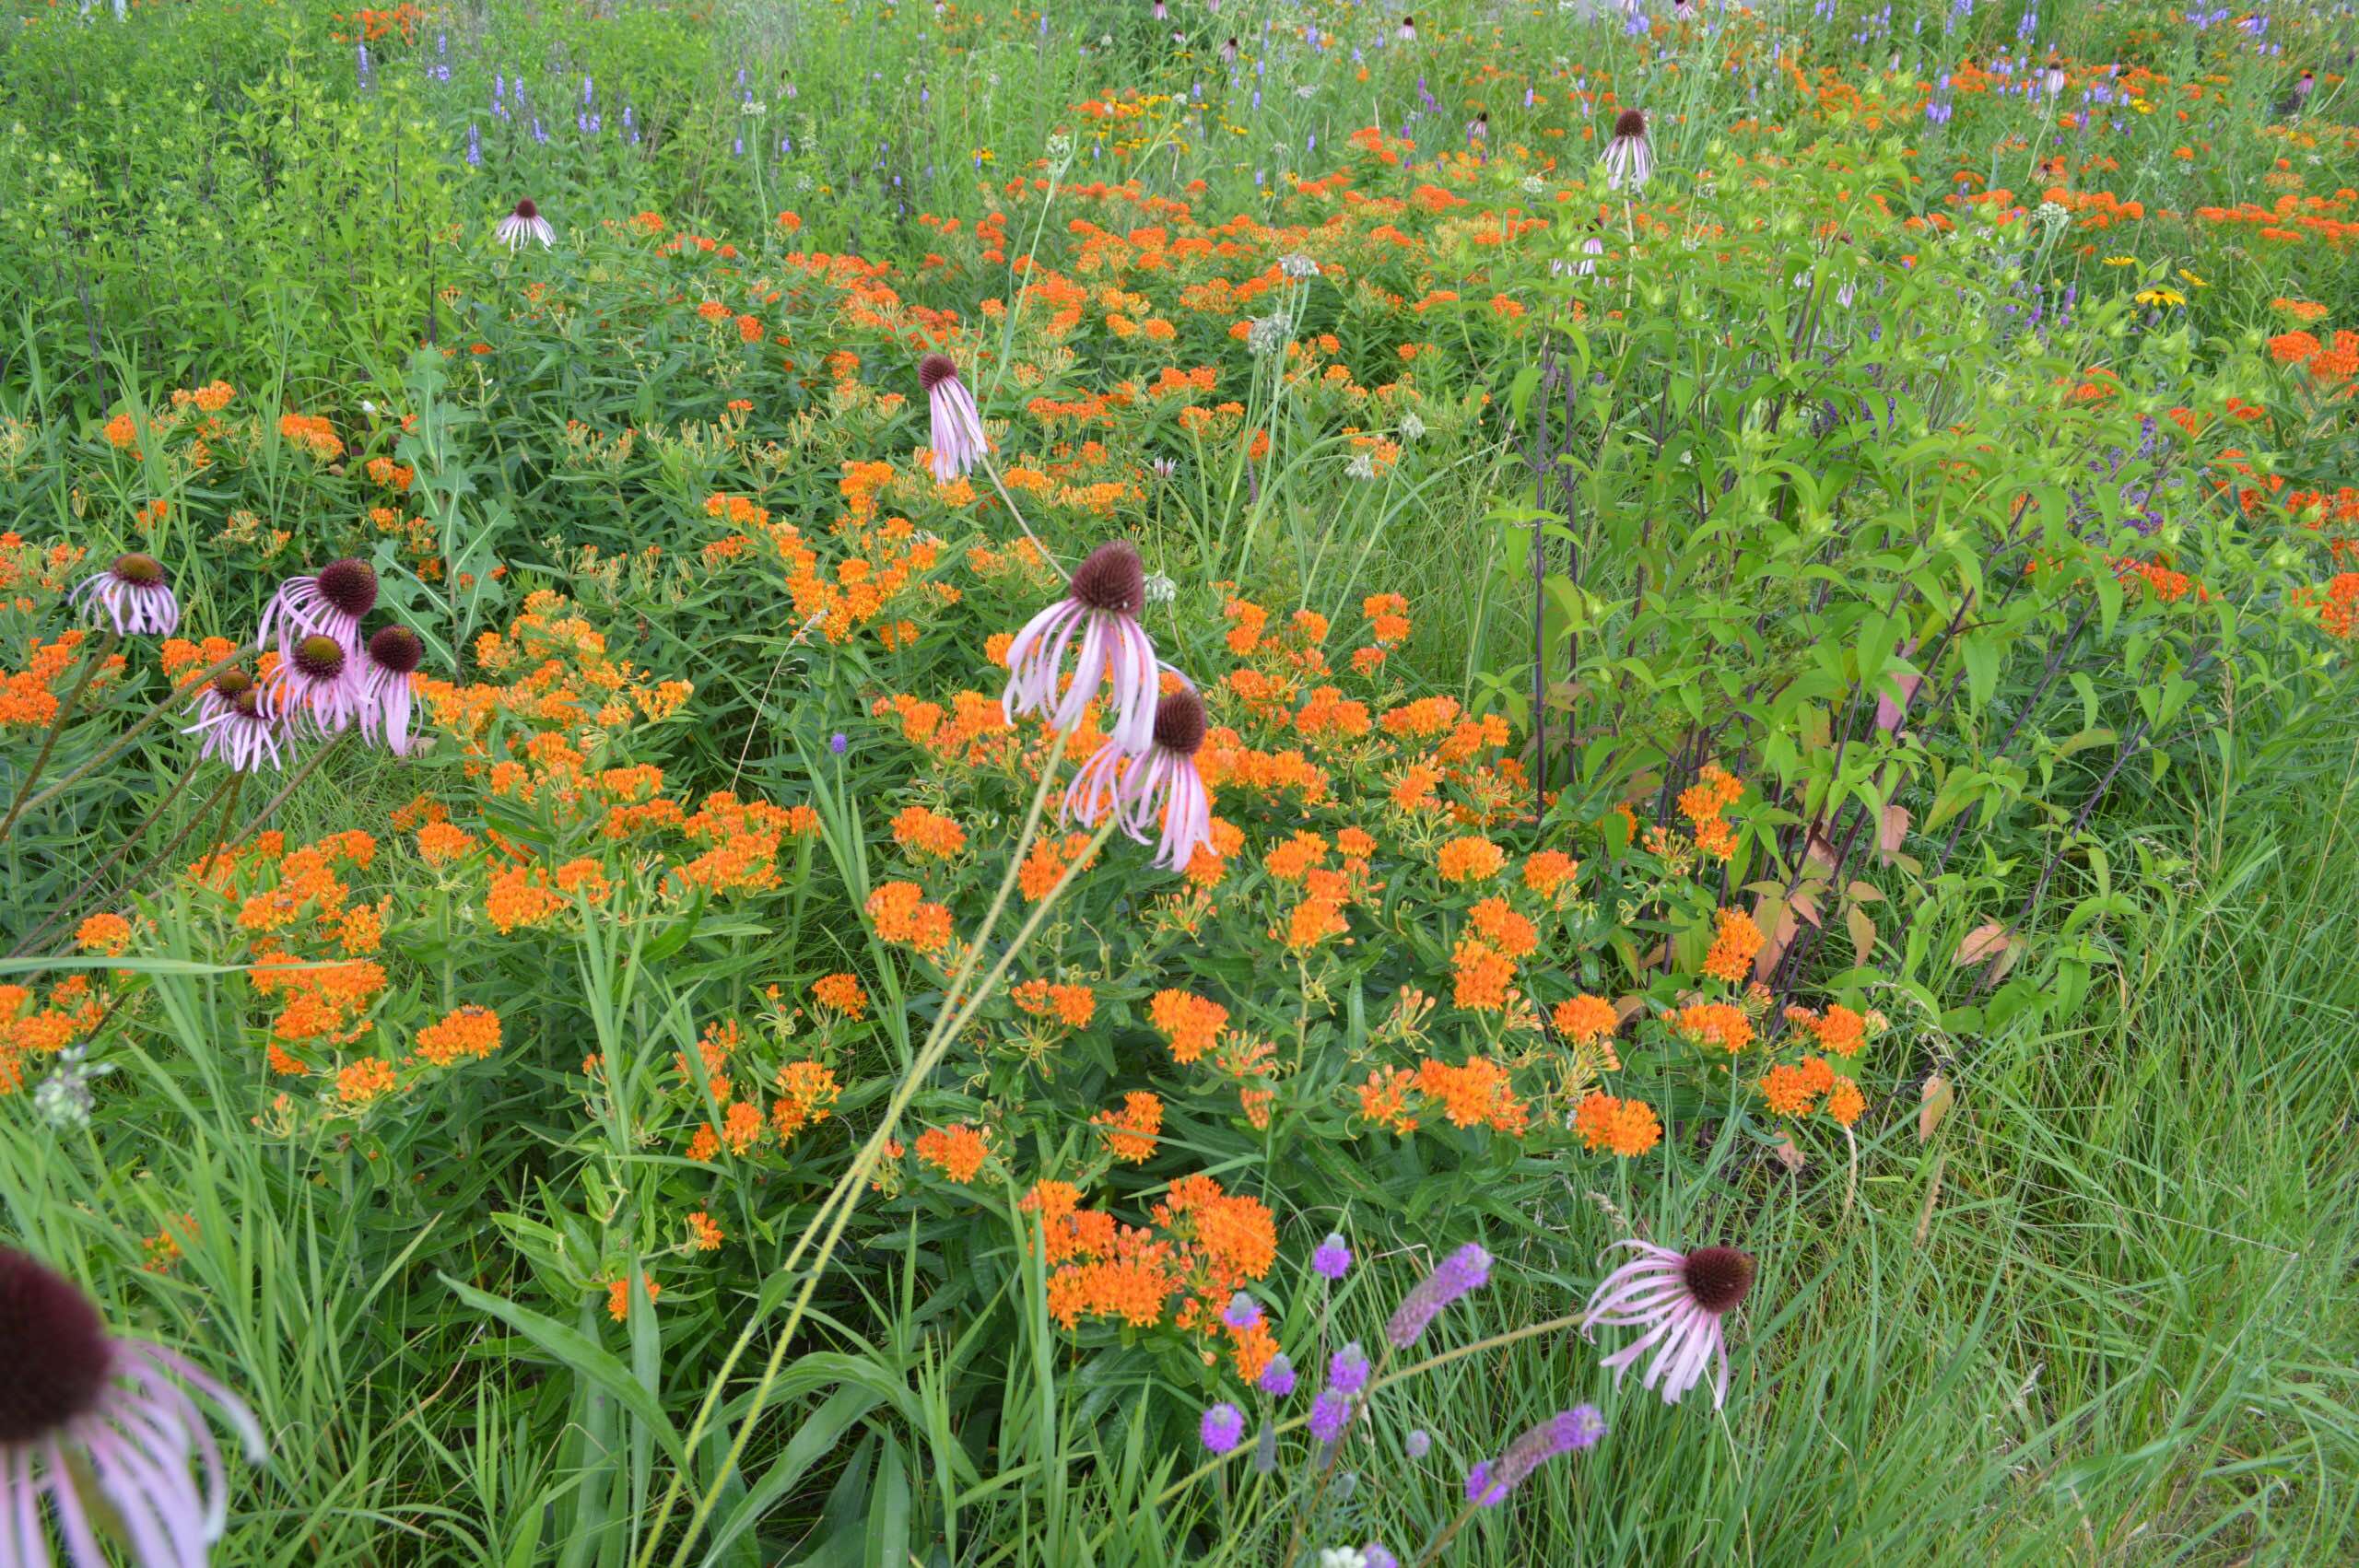 The Lawns to Legumes program aims to protect the federally endangered state bee, the Rusty Patched Bumblebee, and other at-risk pollinators. Even relatively small plantings of native flowering plants can help pollinators by building and connecting important habitat corridors.